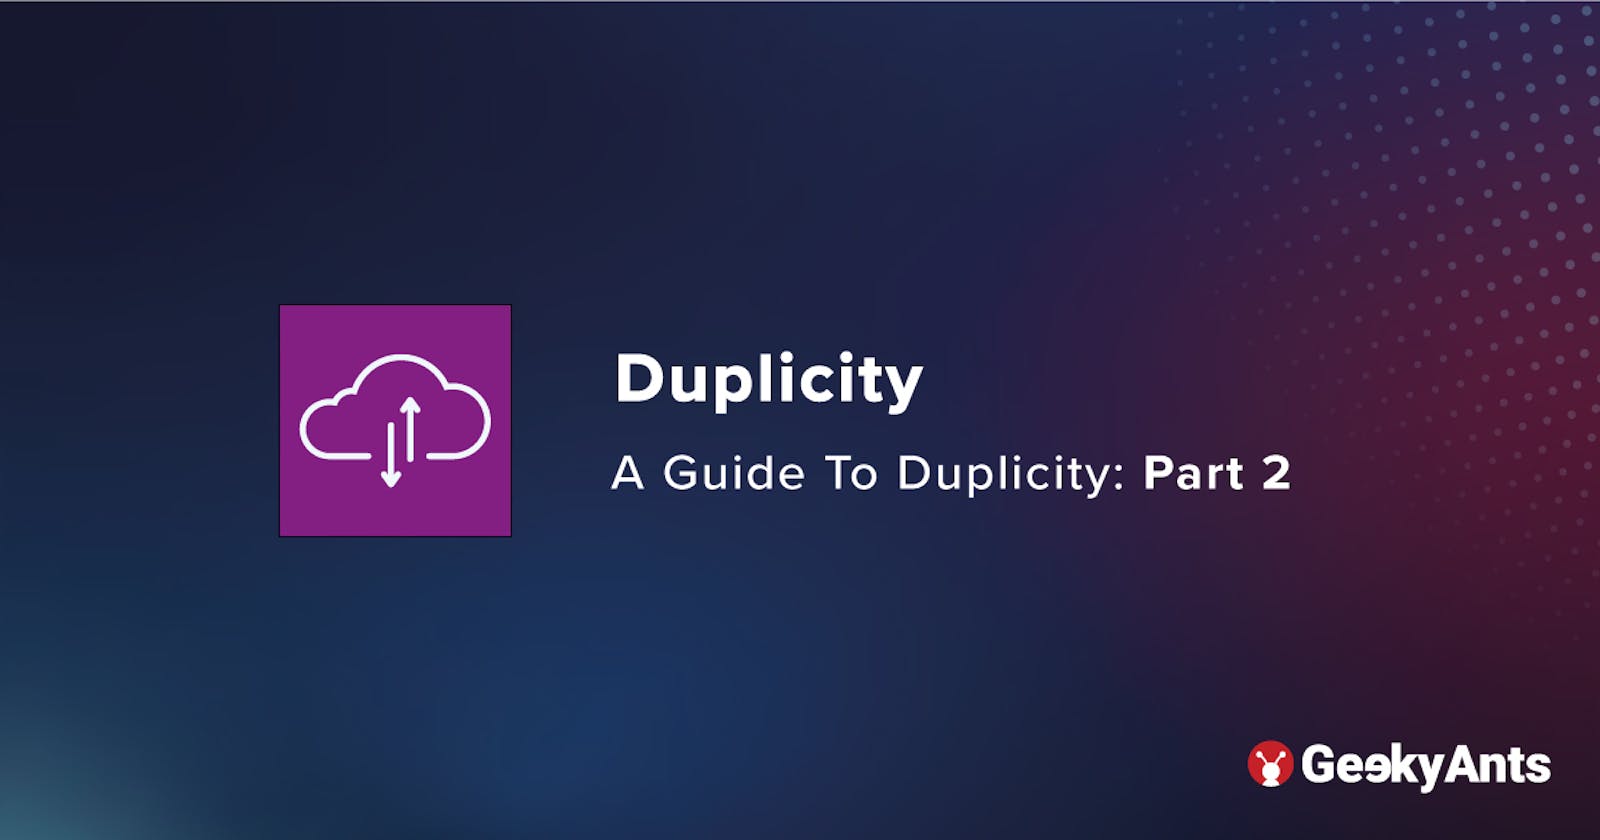 A Guide To Duplicity: Part 2